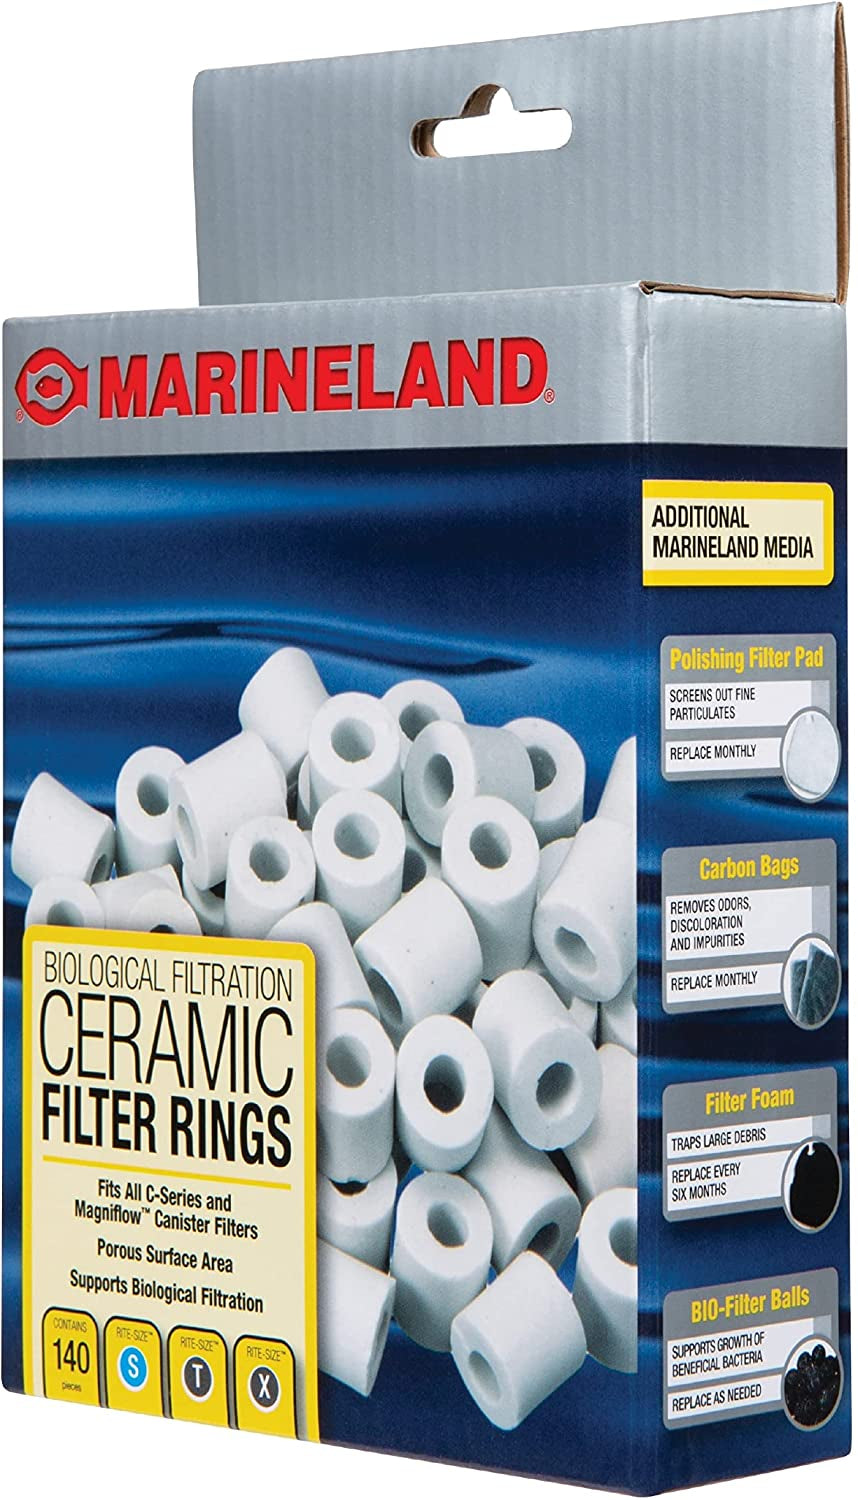 140 count Marineland Ceramic Filter Rings for C-Series and Magniflow Filters